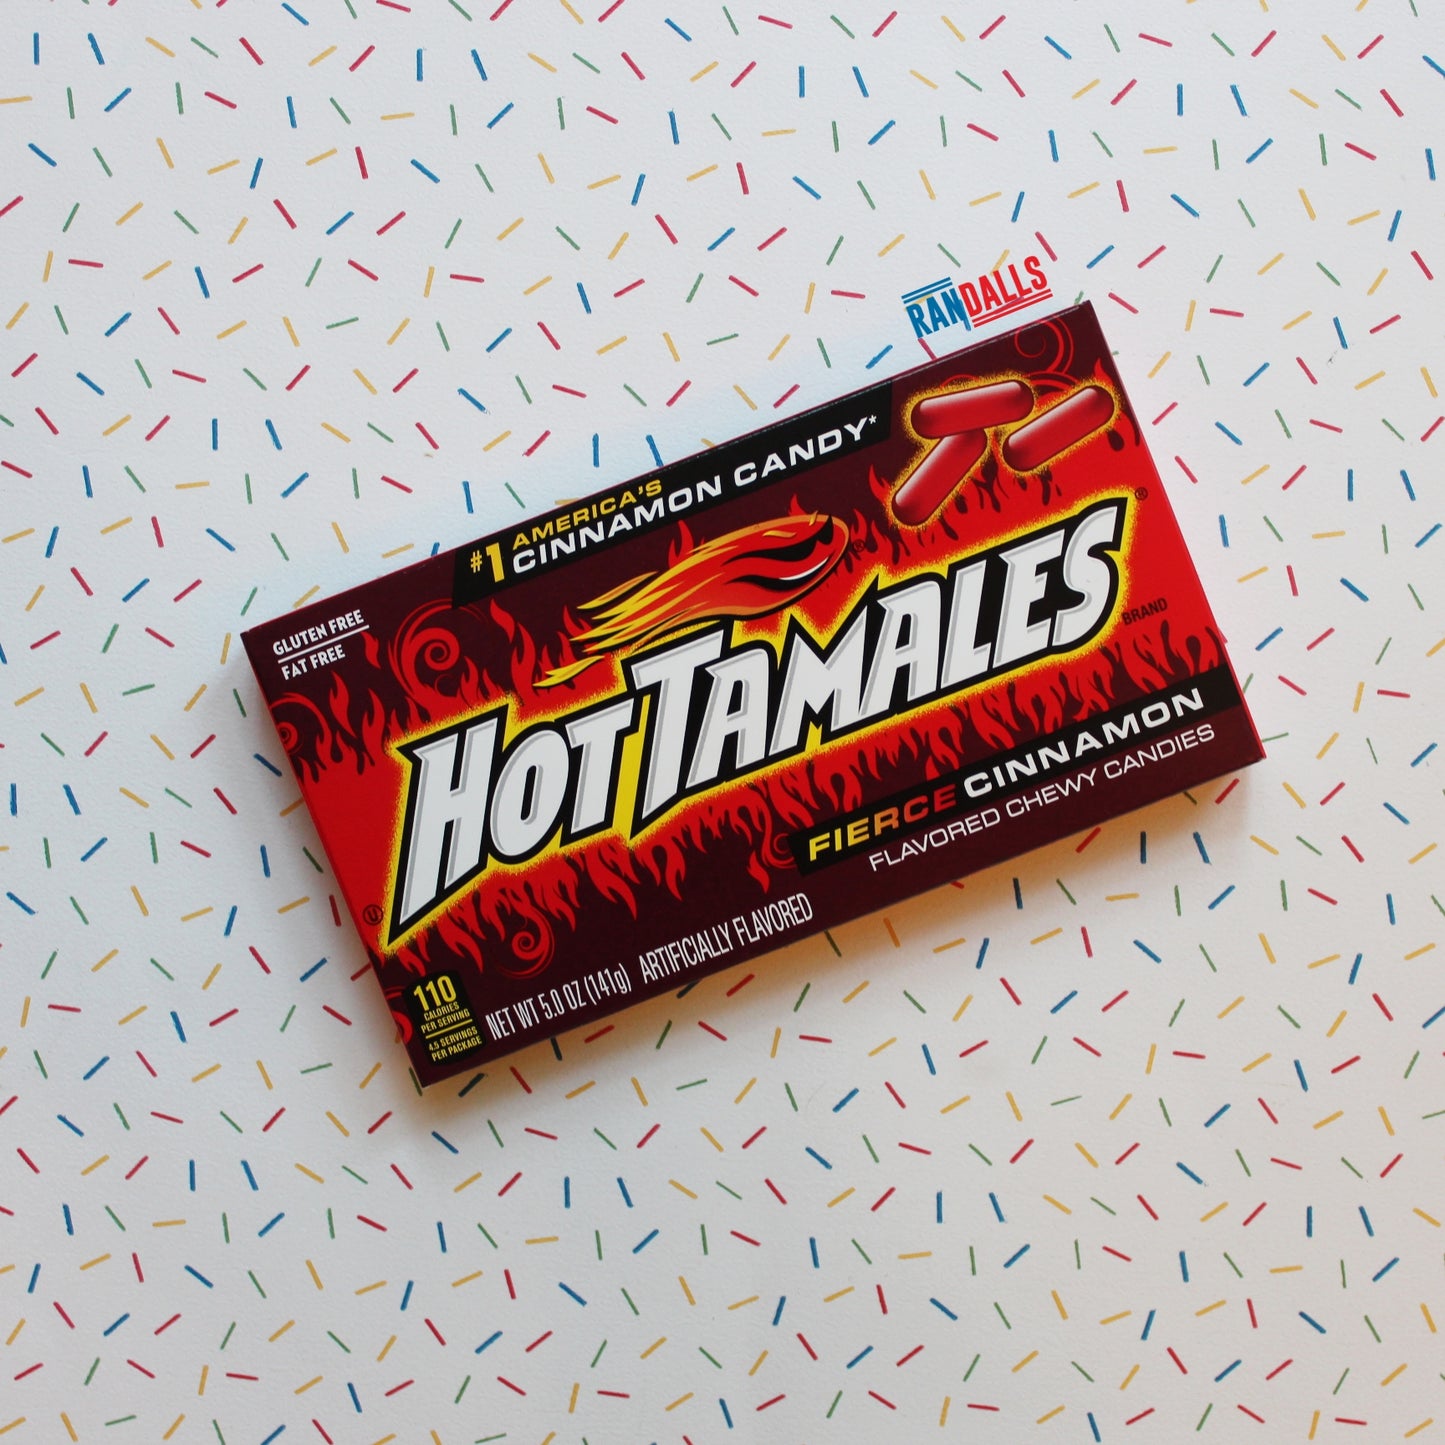 hot tamales box, fierce cinnamon sweets, candy, chewy, spicy, randalls